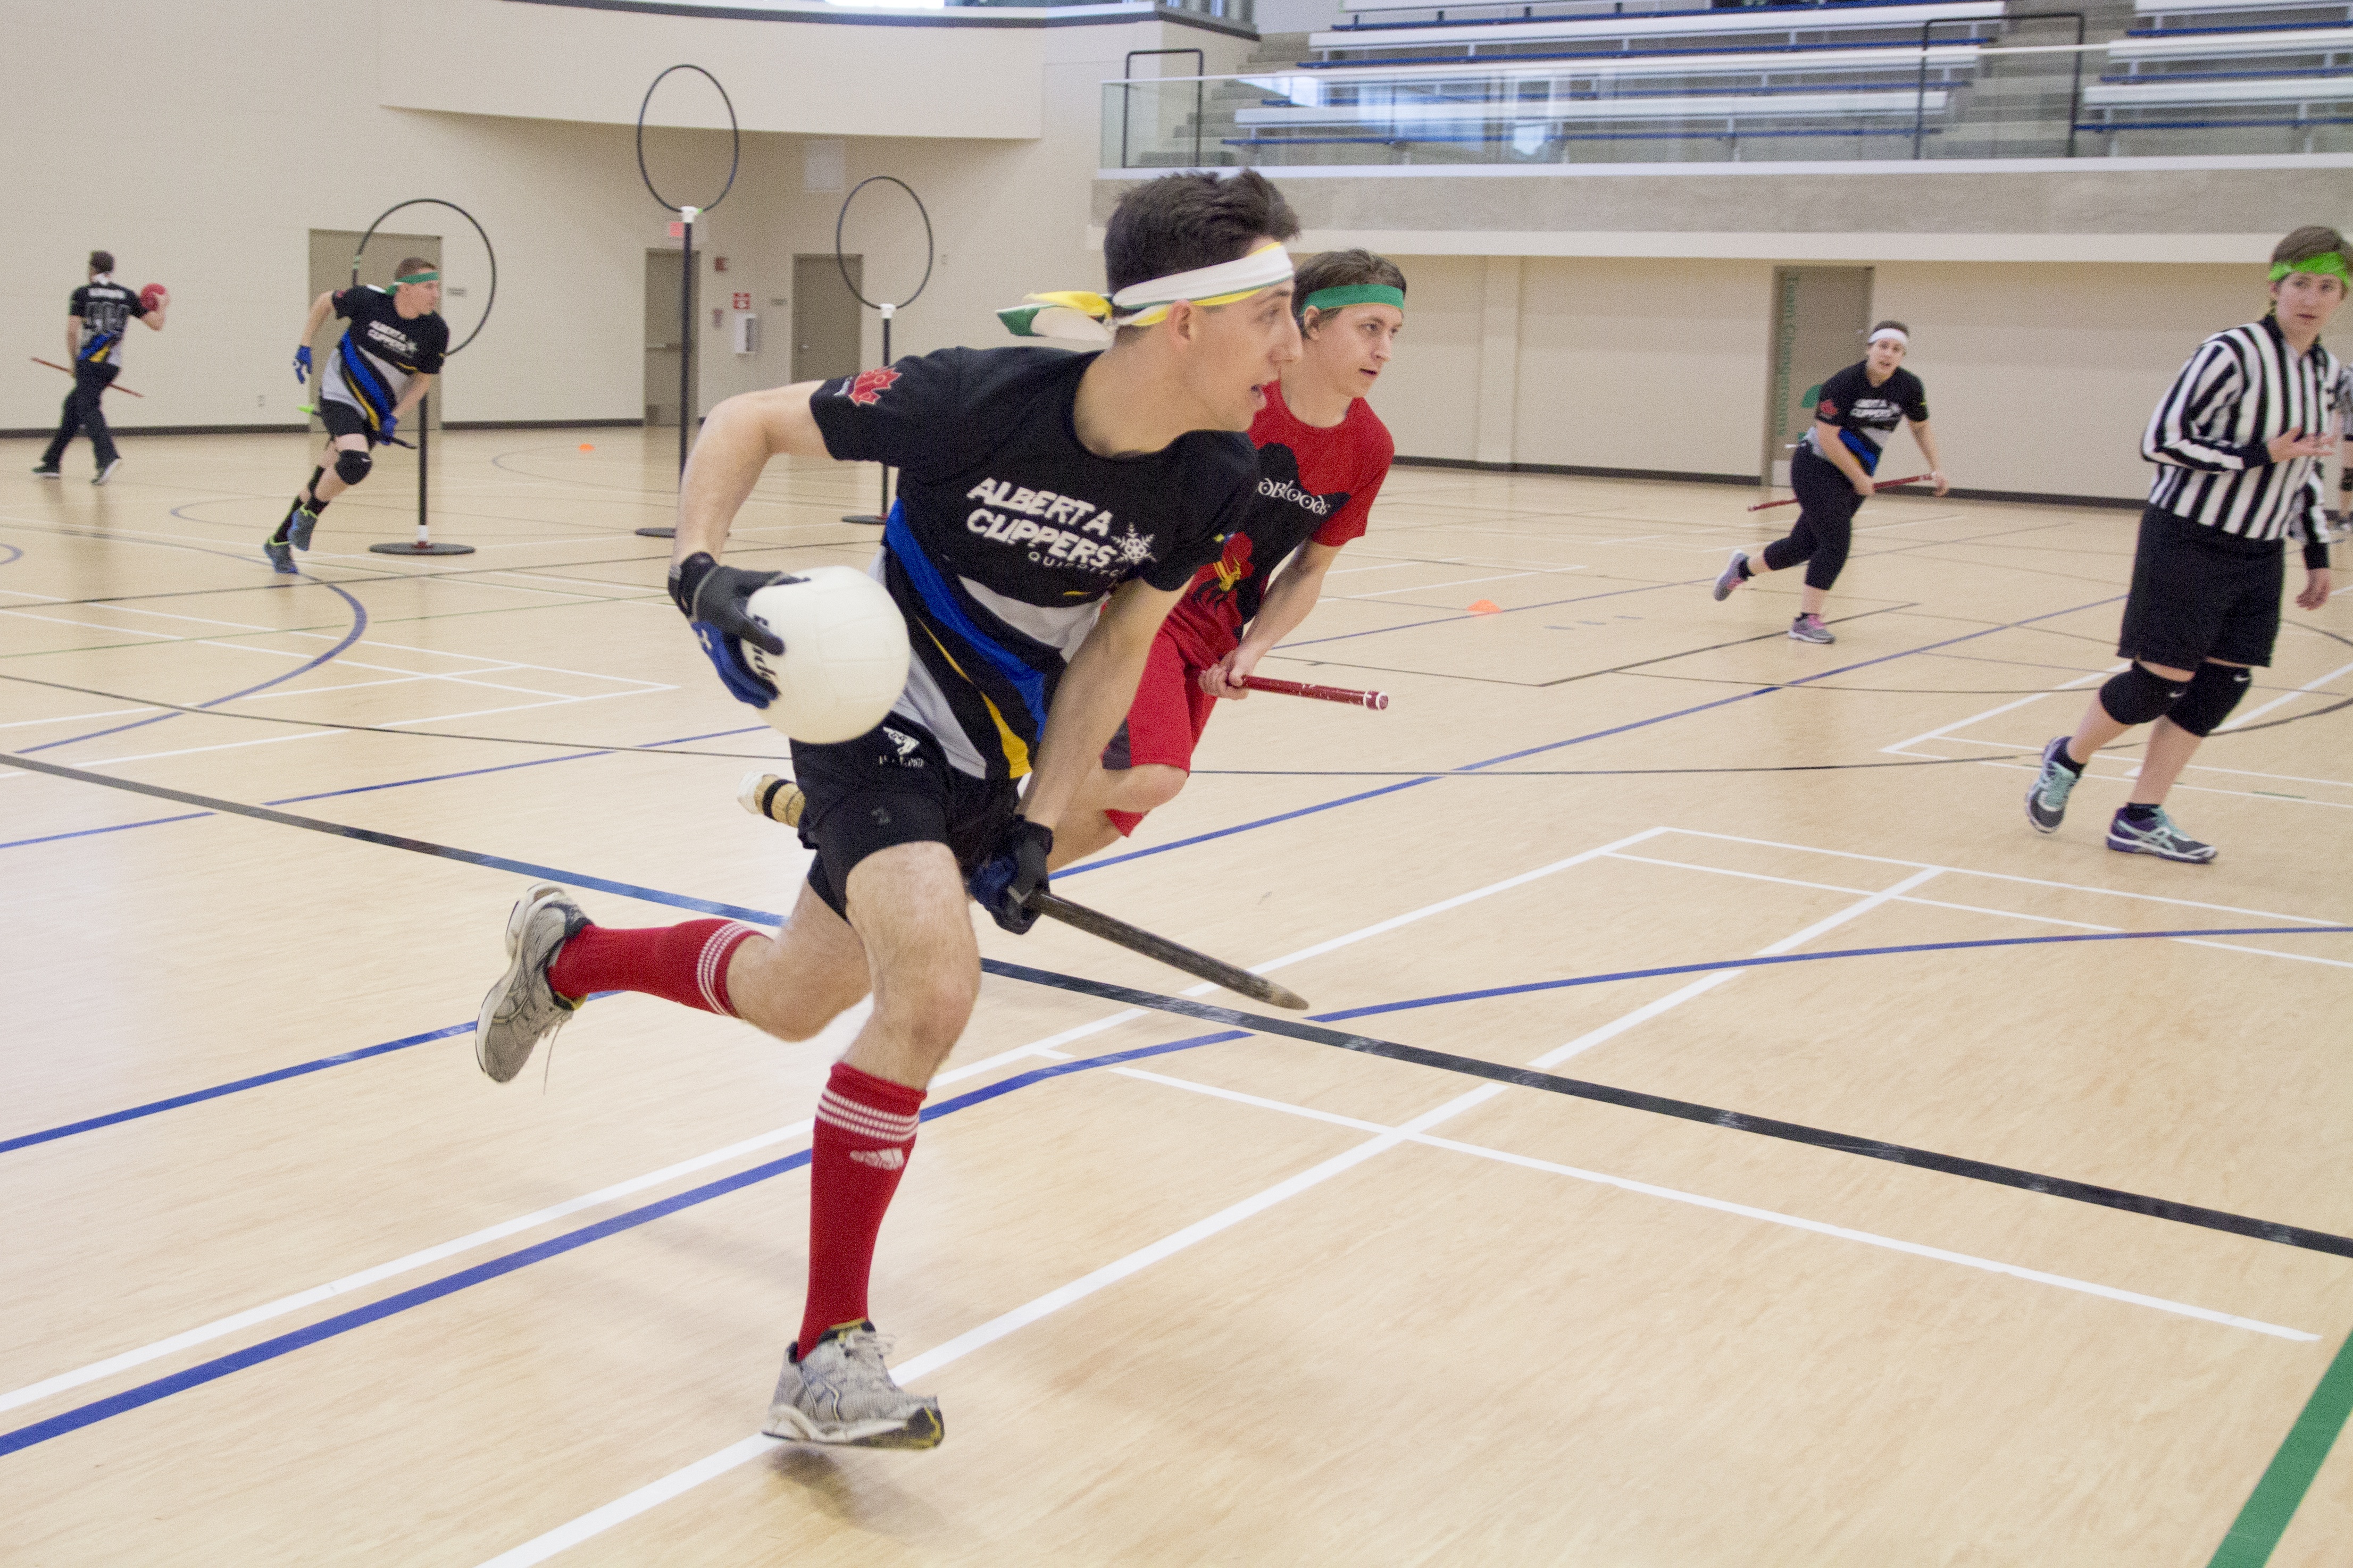 UNIQUE FUN – Chris Radojewski of the Alberta Clippers Quidditch team races with the ‘quaffle’ and seeks to pass while opponent James Newman of the Calgary Mudbloods looks ahead to cut off Radojewski.